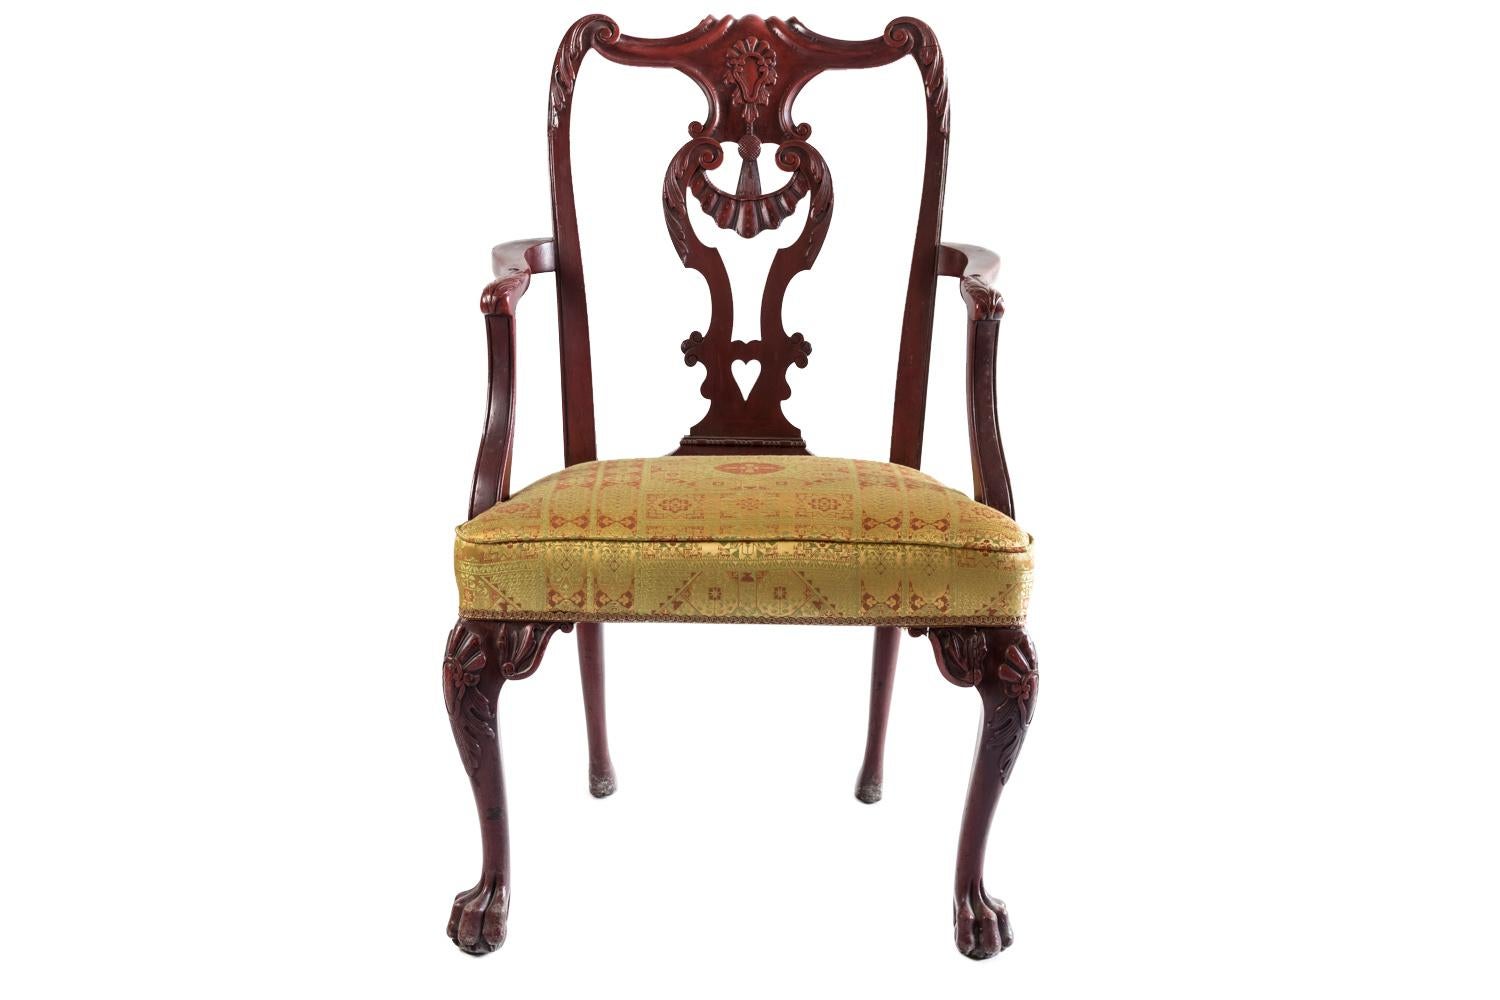 Pair of Chippendale style armchairs in red lacquered wood standing on four legs: cabriole front legs with a decor of cartouche, foliage and shell, claw and ball feet. Sabre back legs ending with simple shoes. Arm support behind the leg line, S-shape